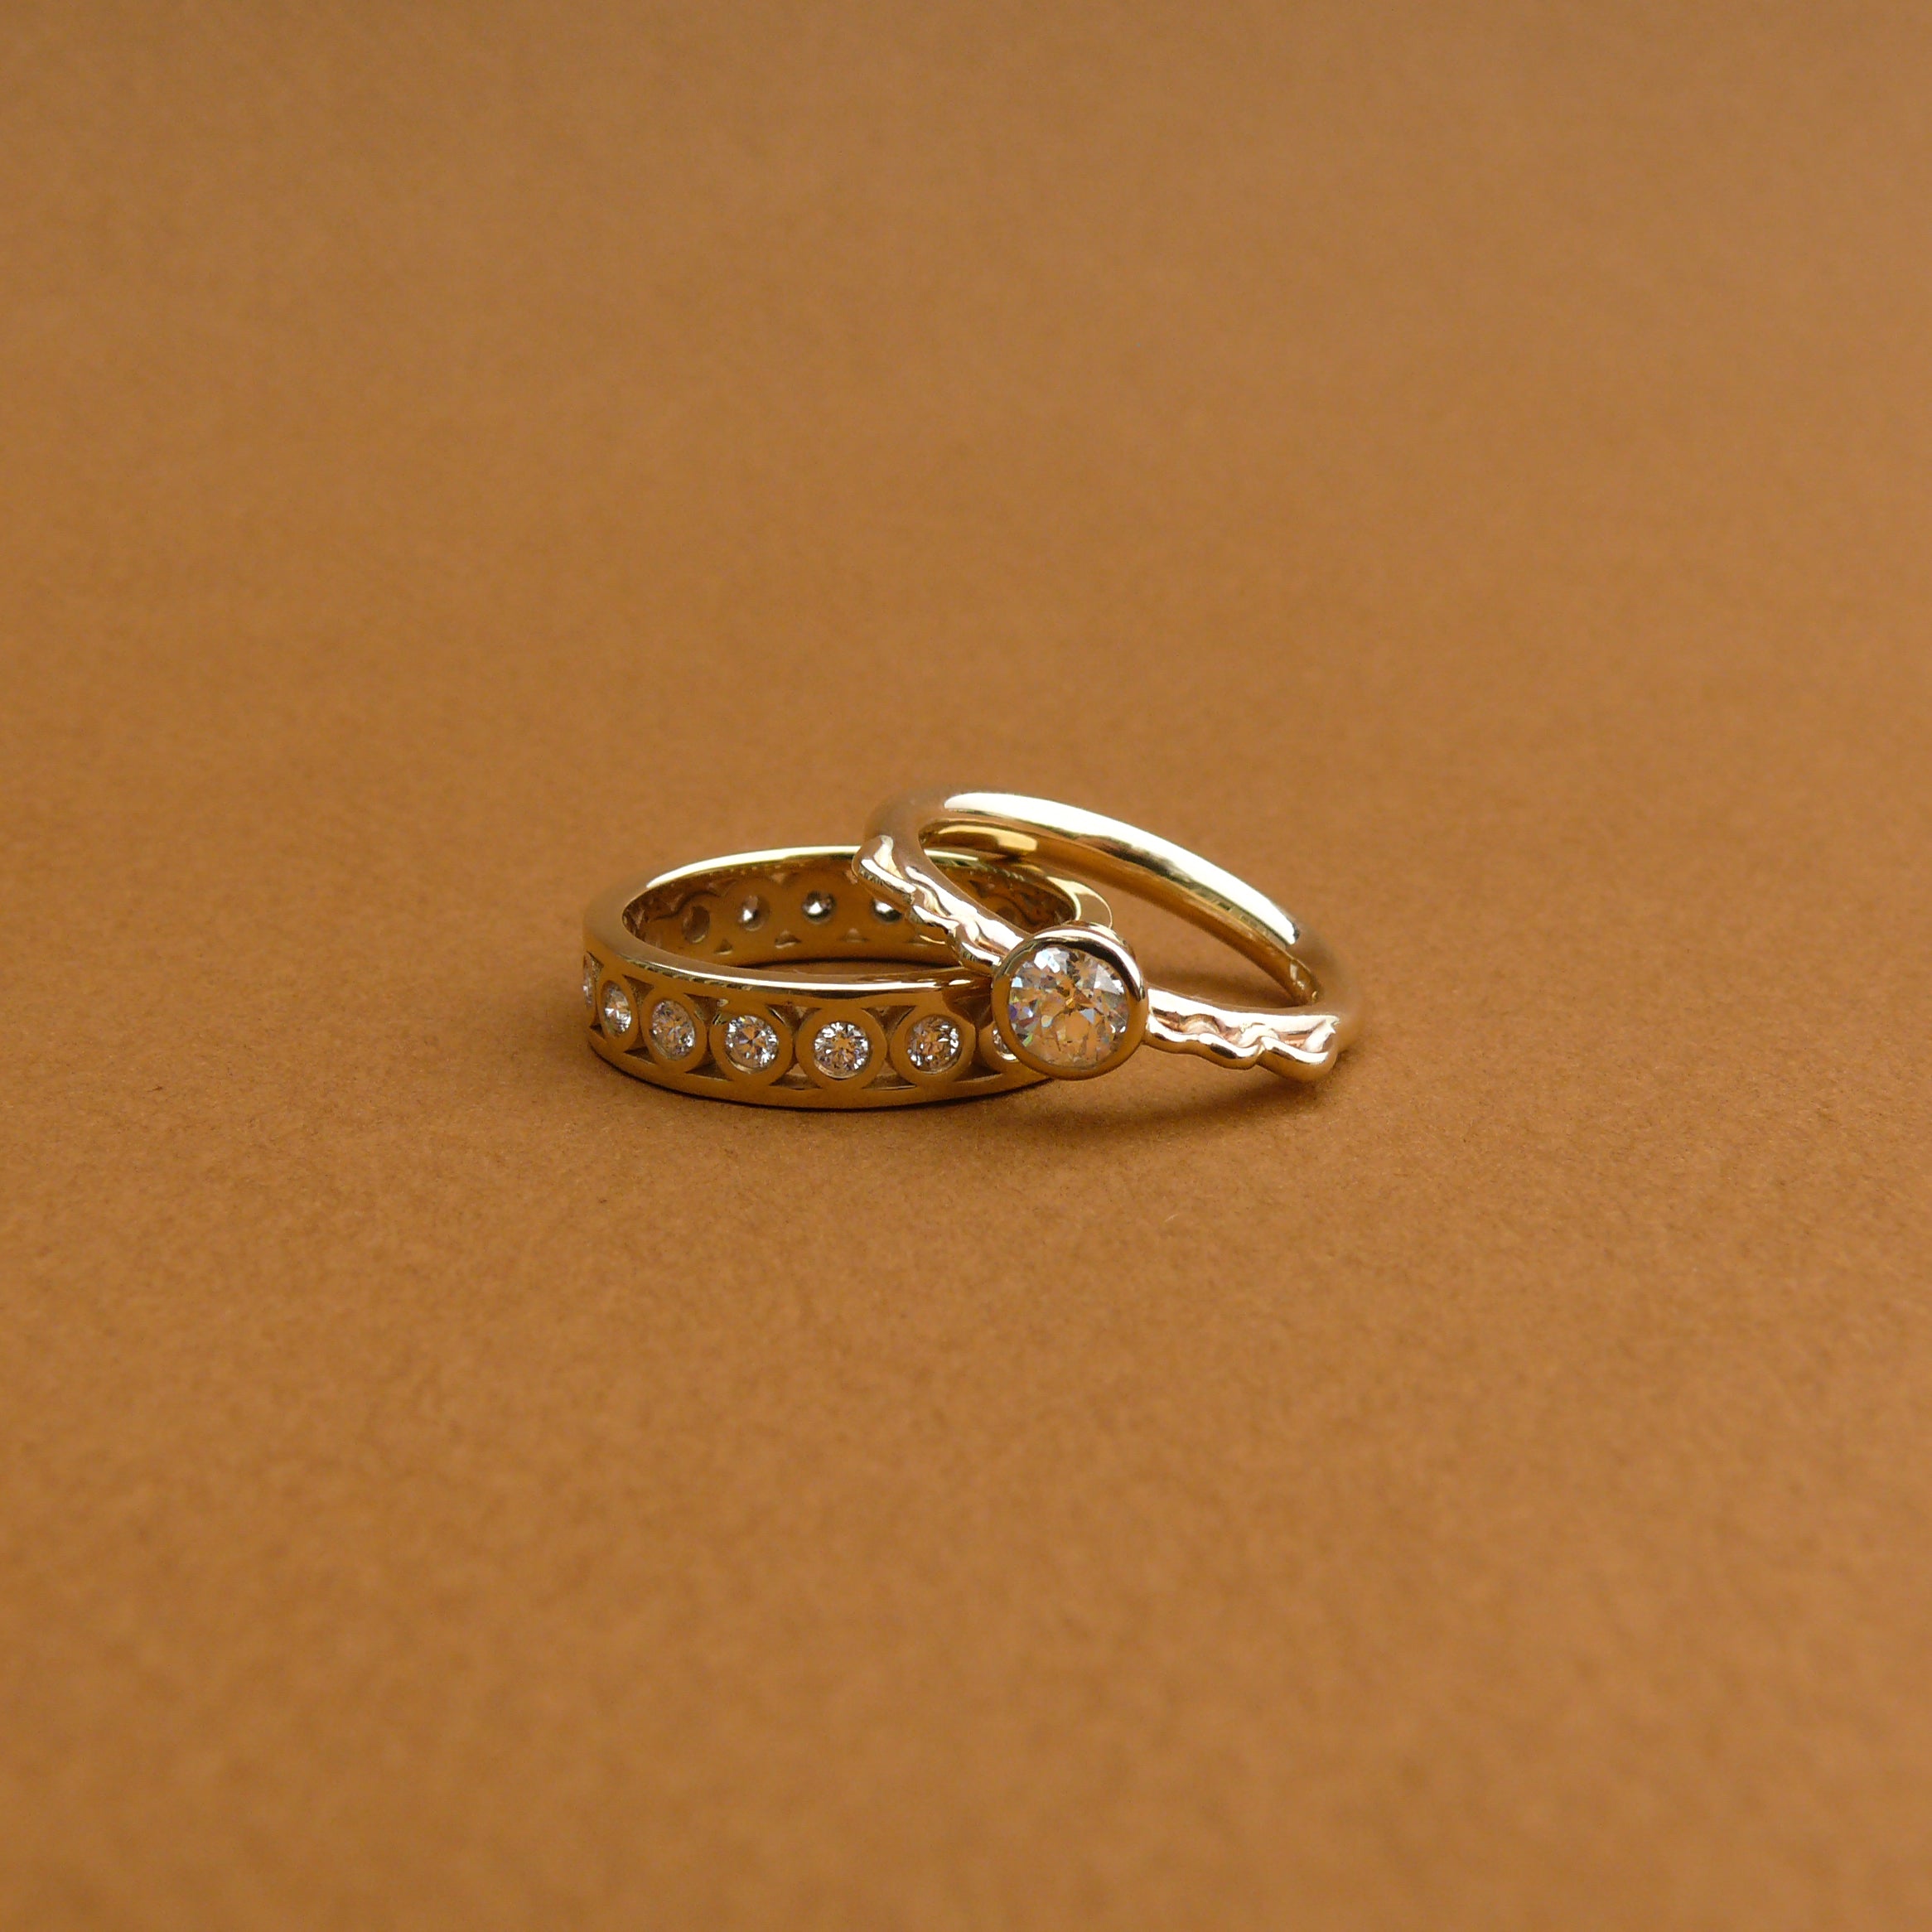 Two rings, all white diamond bezel set on gold rings that have the profile of a vessel. One ring is a diamond eternity band.